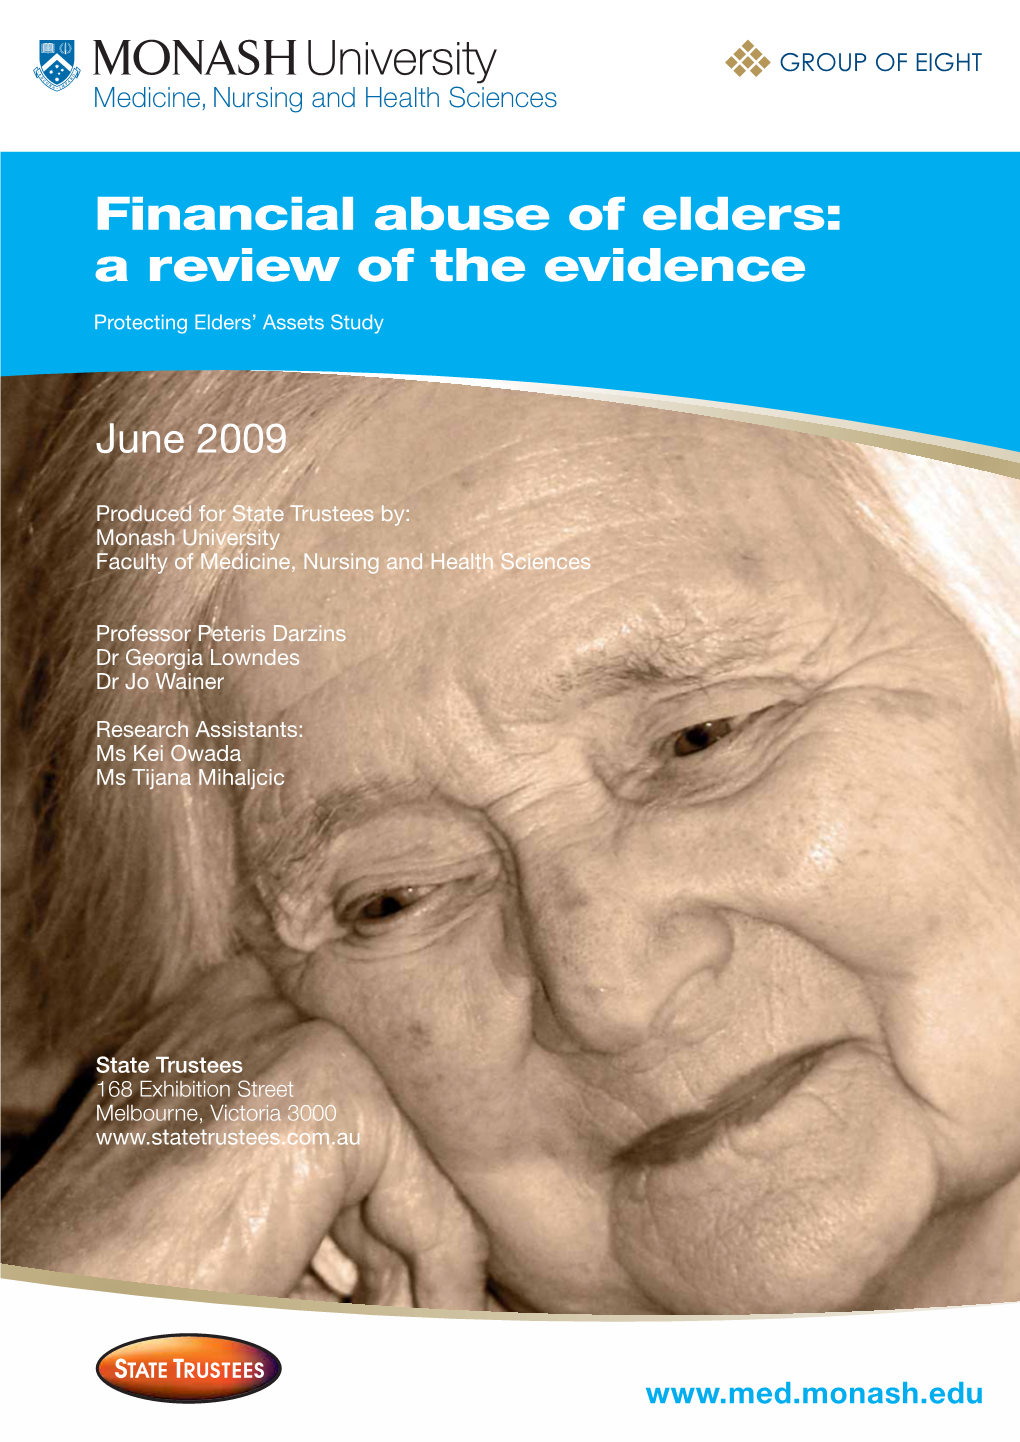 Financial Abuse of Elders: a Review of the Evidence